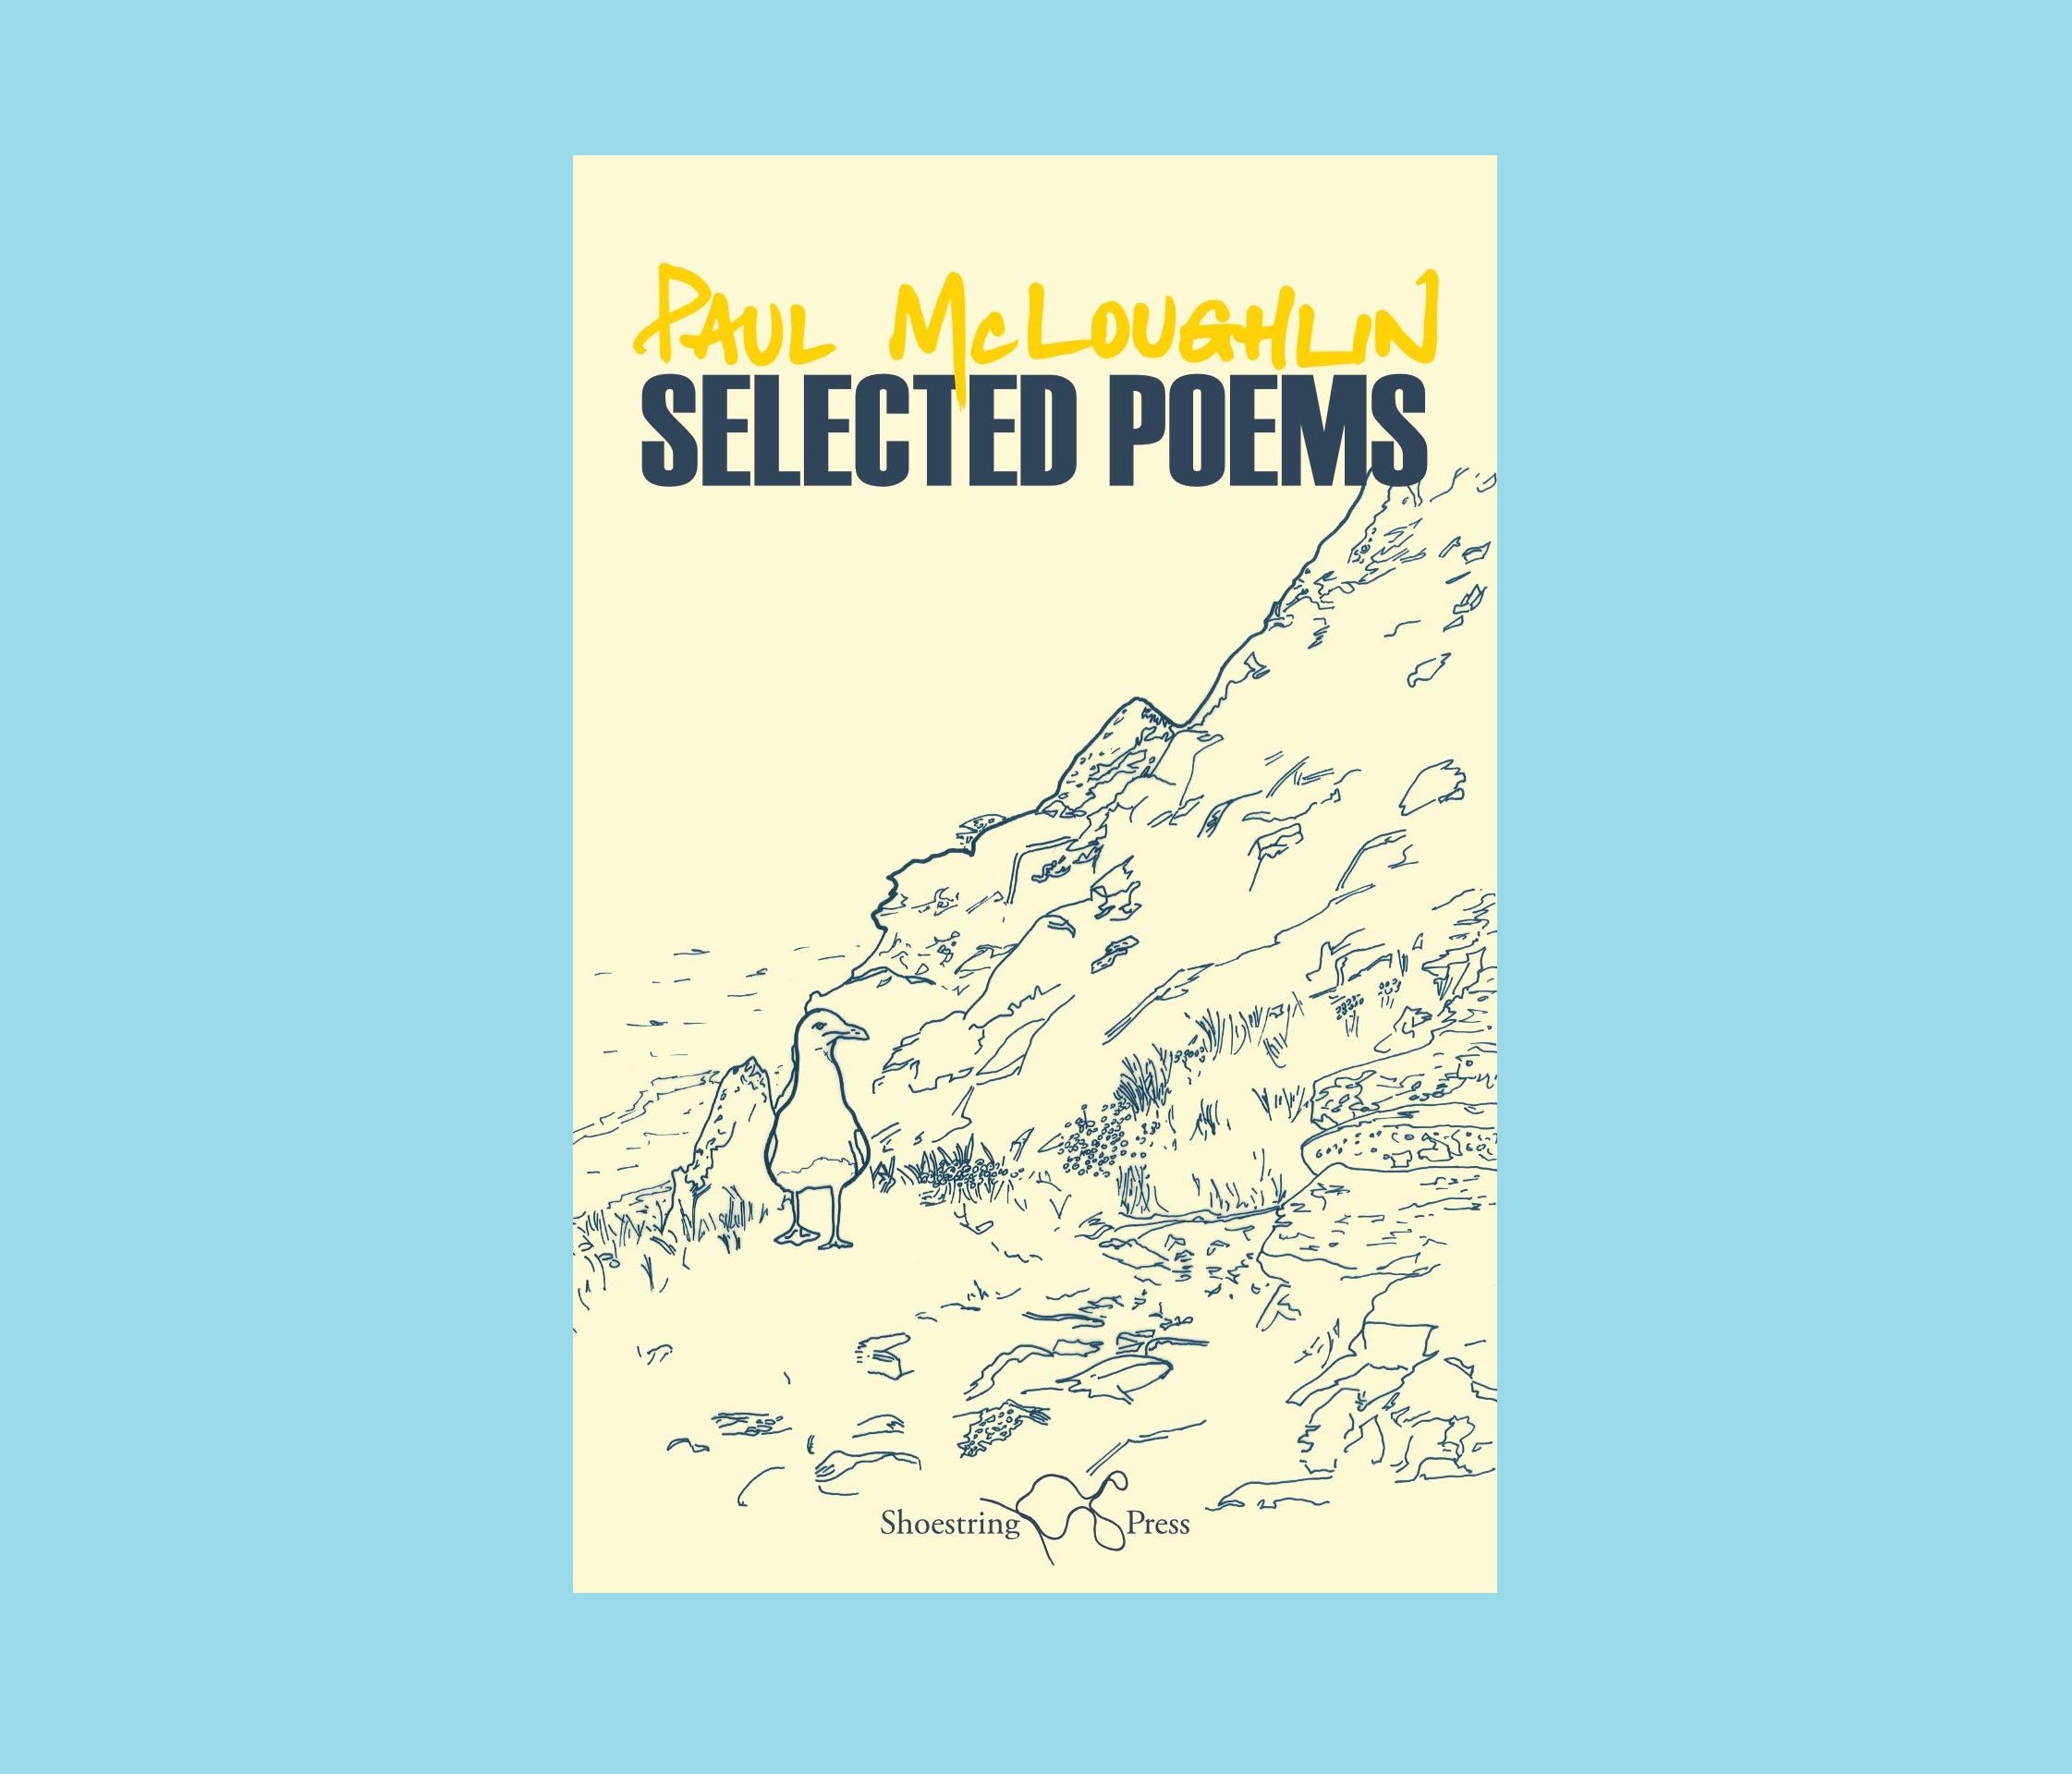 A poem from Paul McLoughlin: Selected Poems